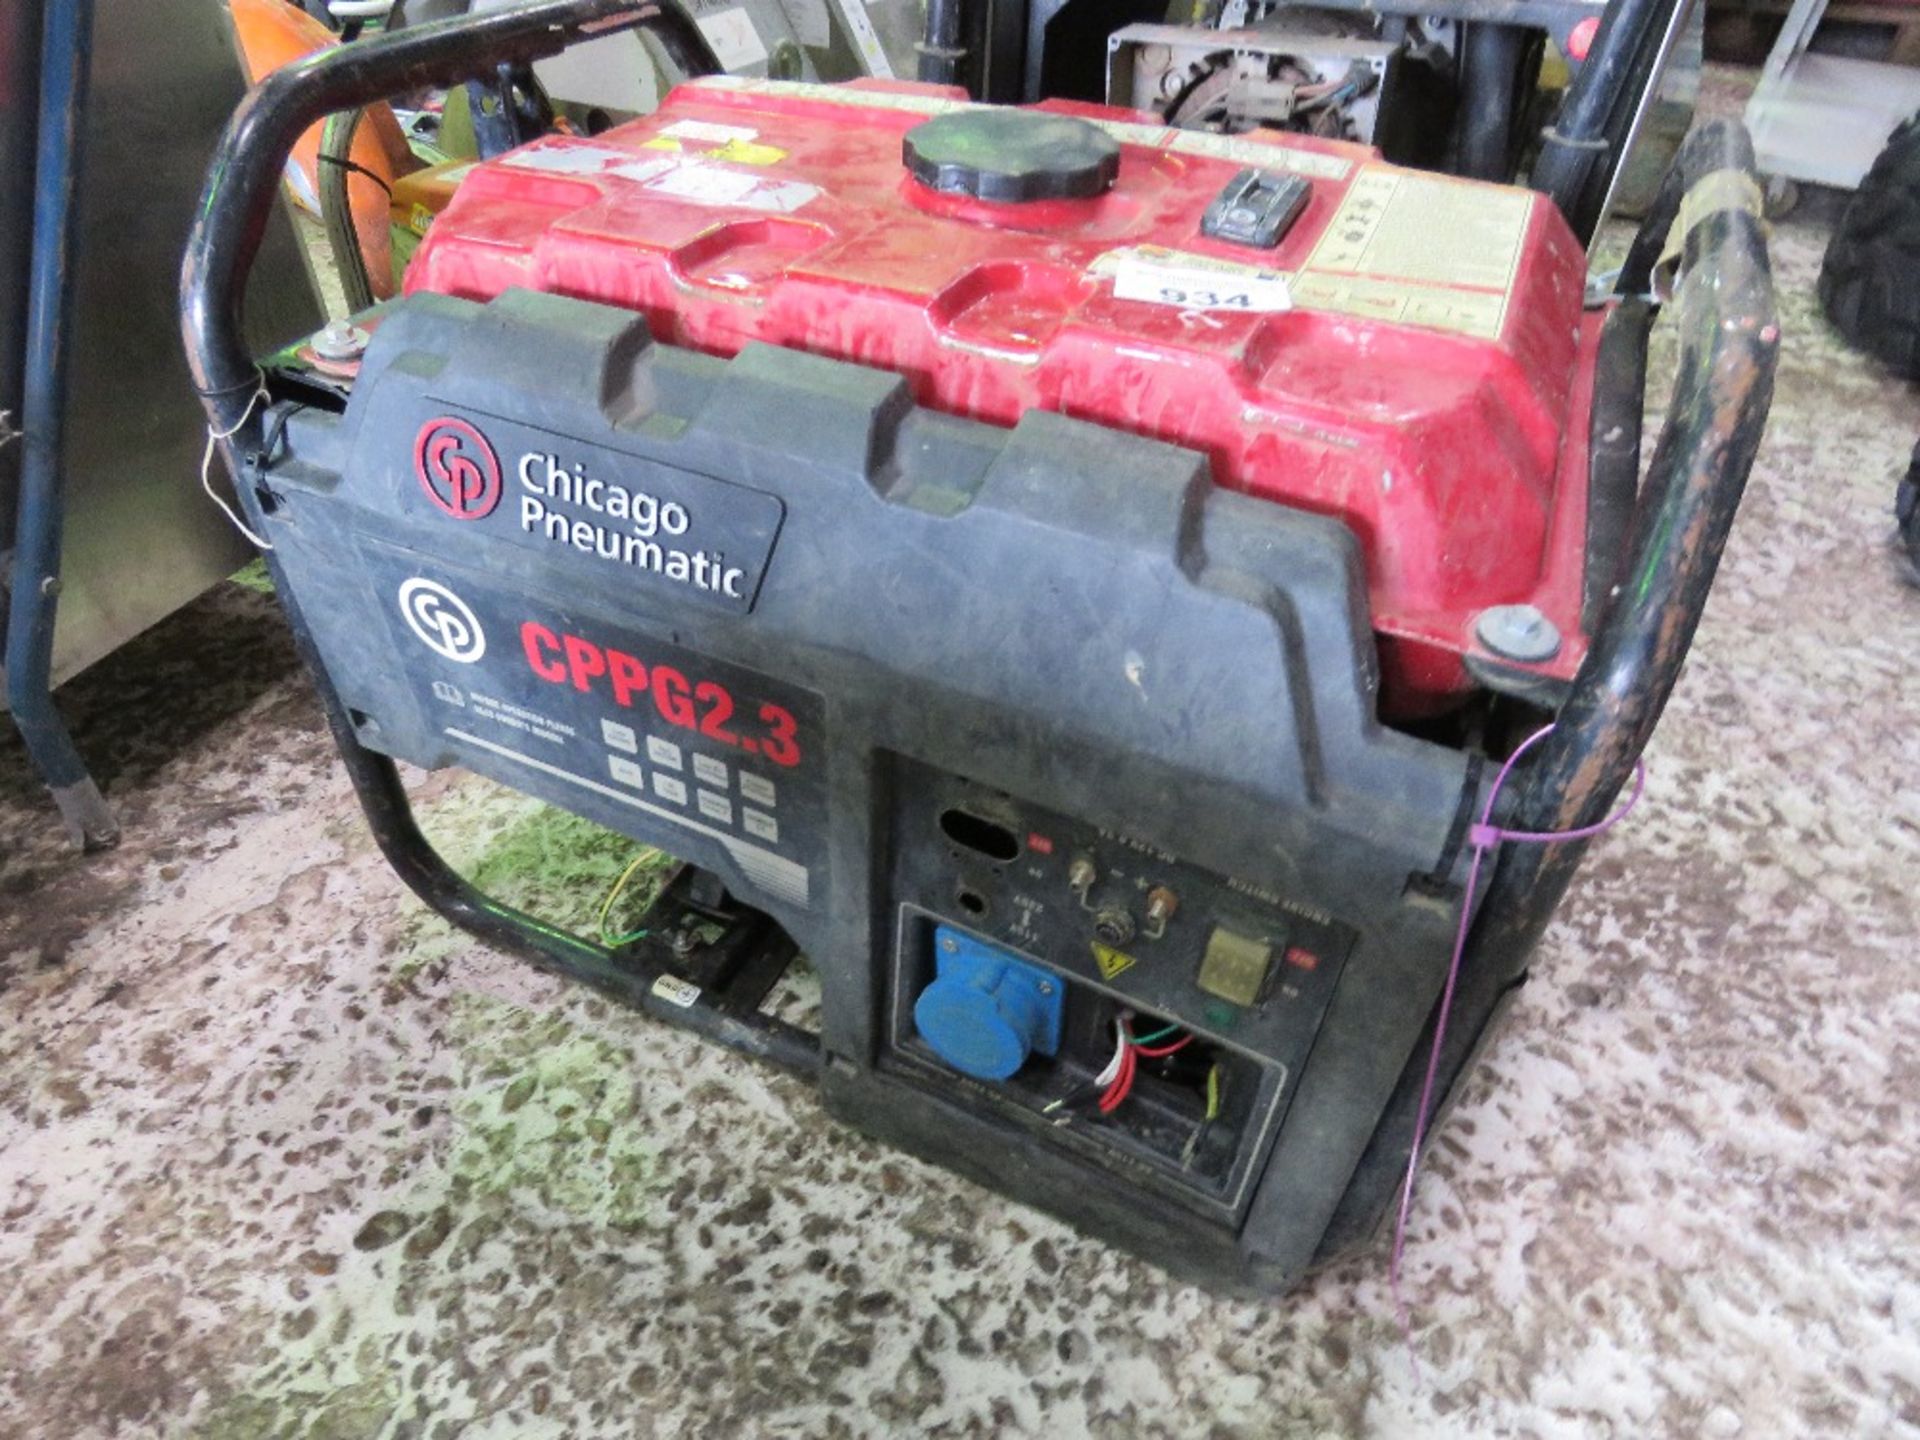 CPPG2.3 PETROL ENGINED GENERATOR.